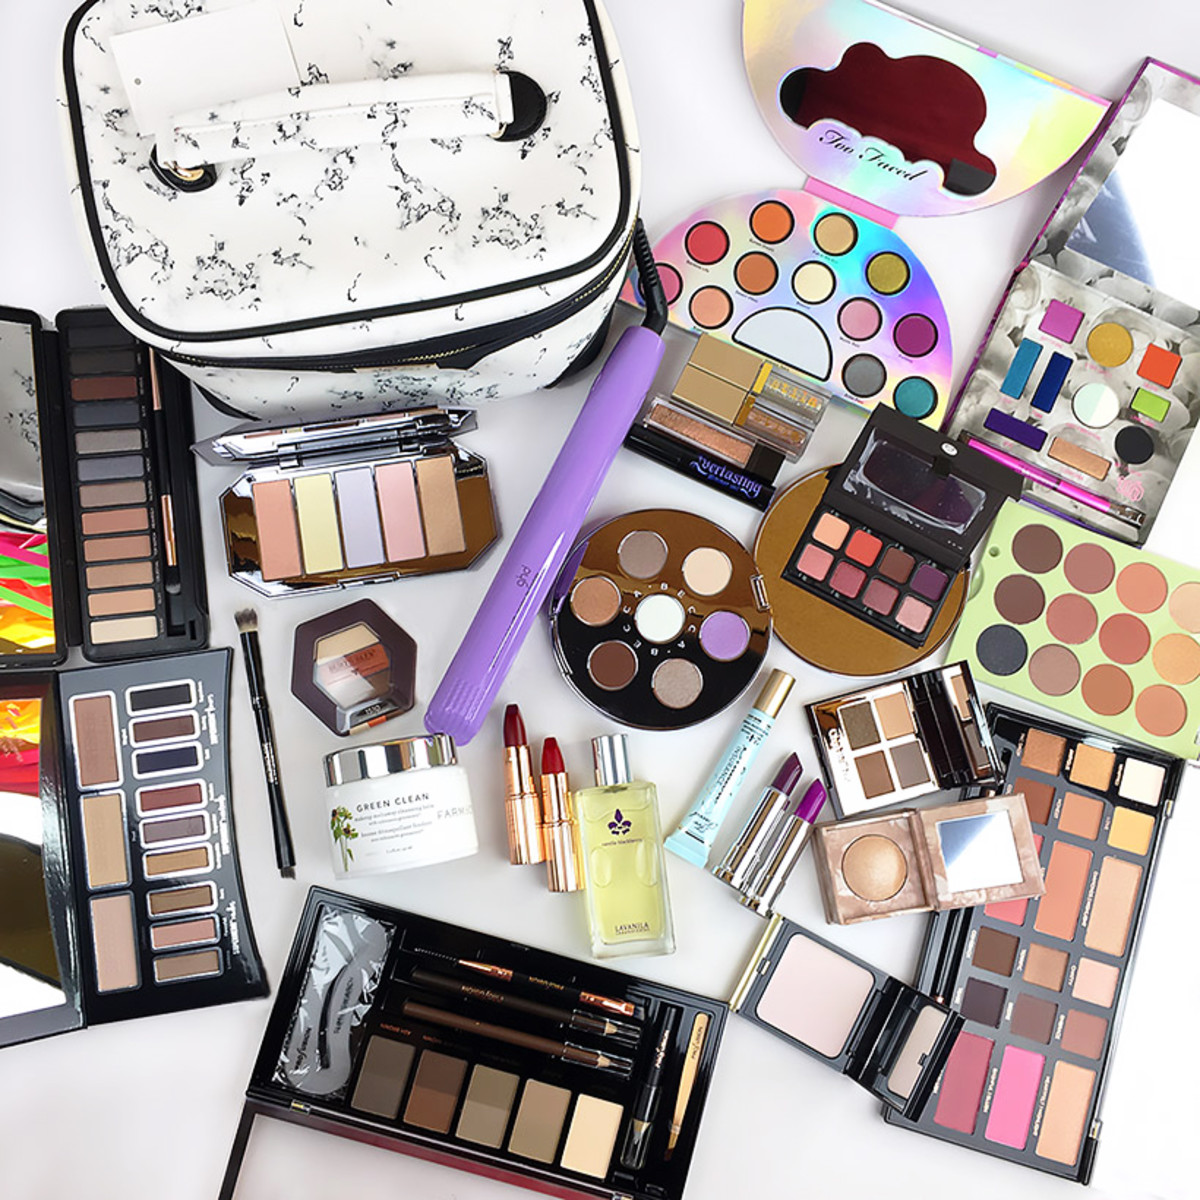 A lucky Beautygeeks reader in Canada/USA could win every single item; enter by 23 April 2018!